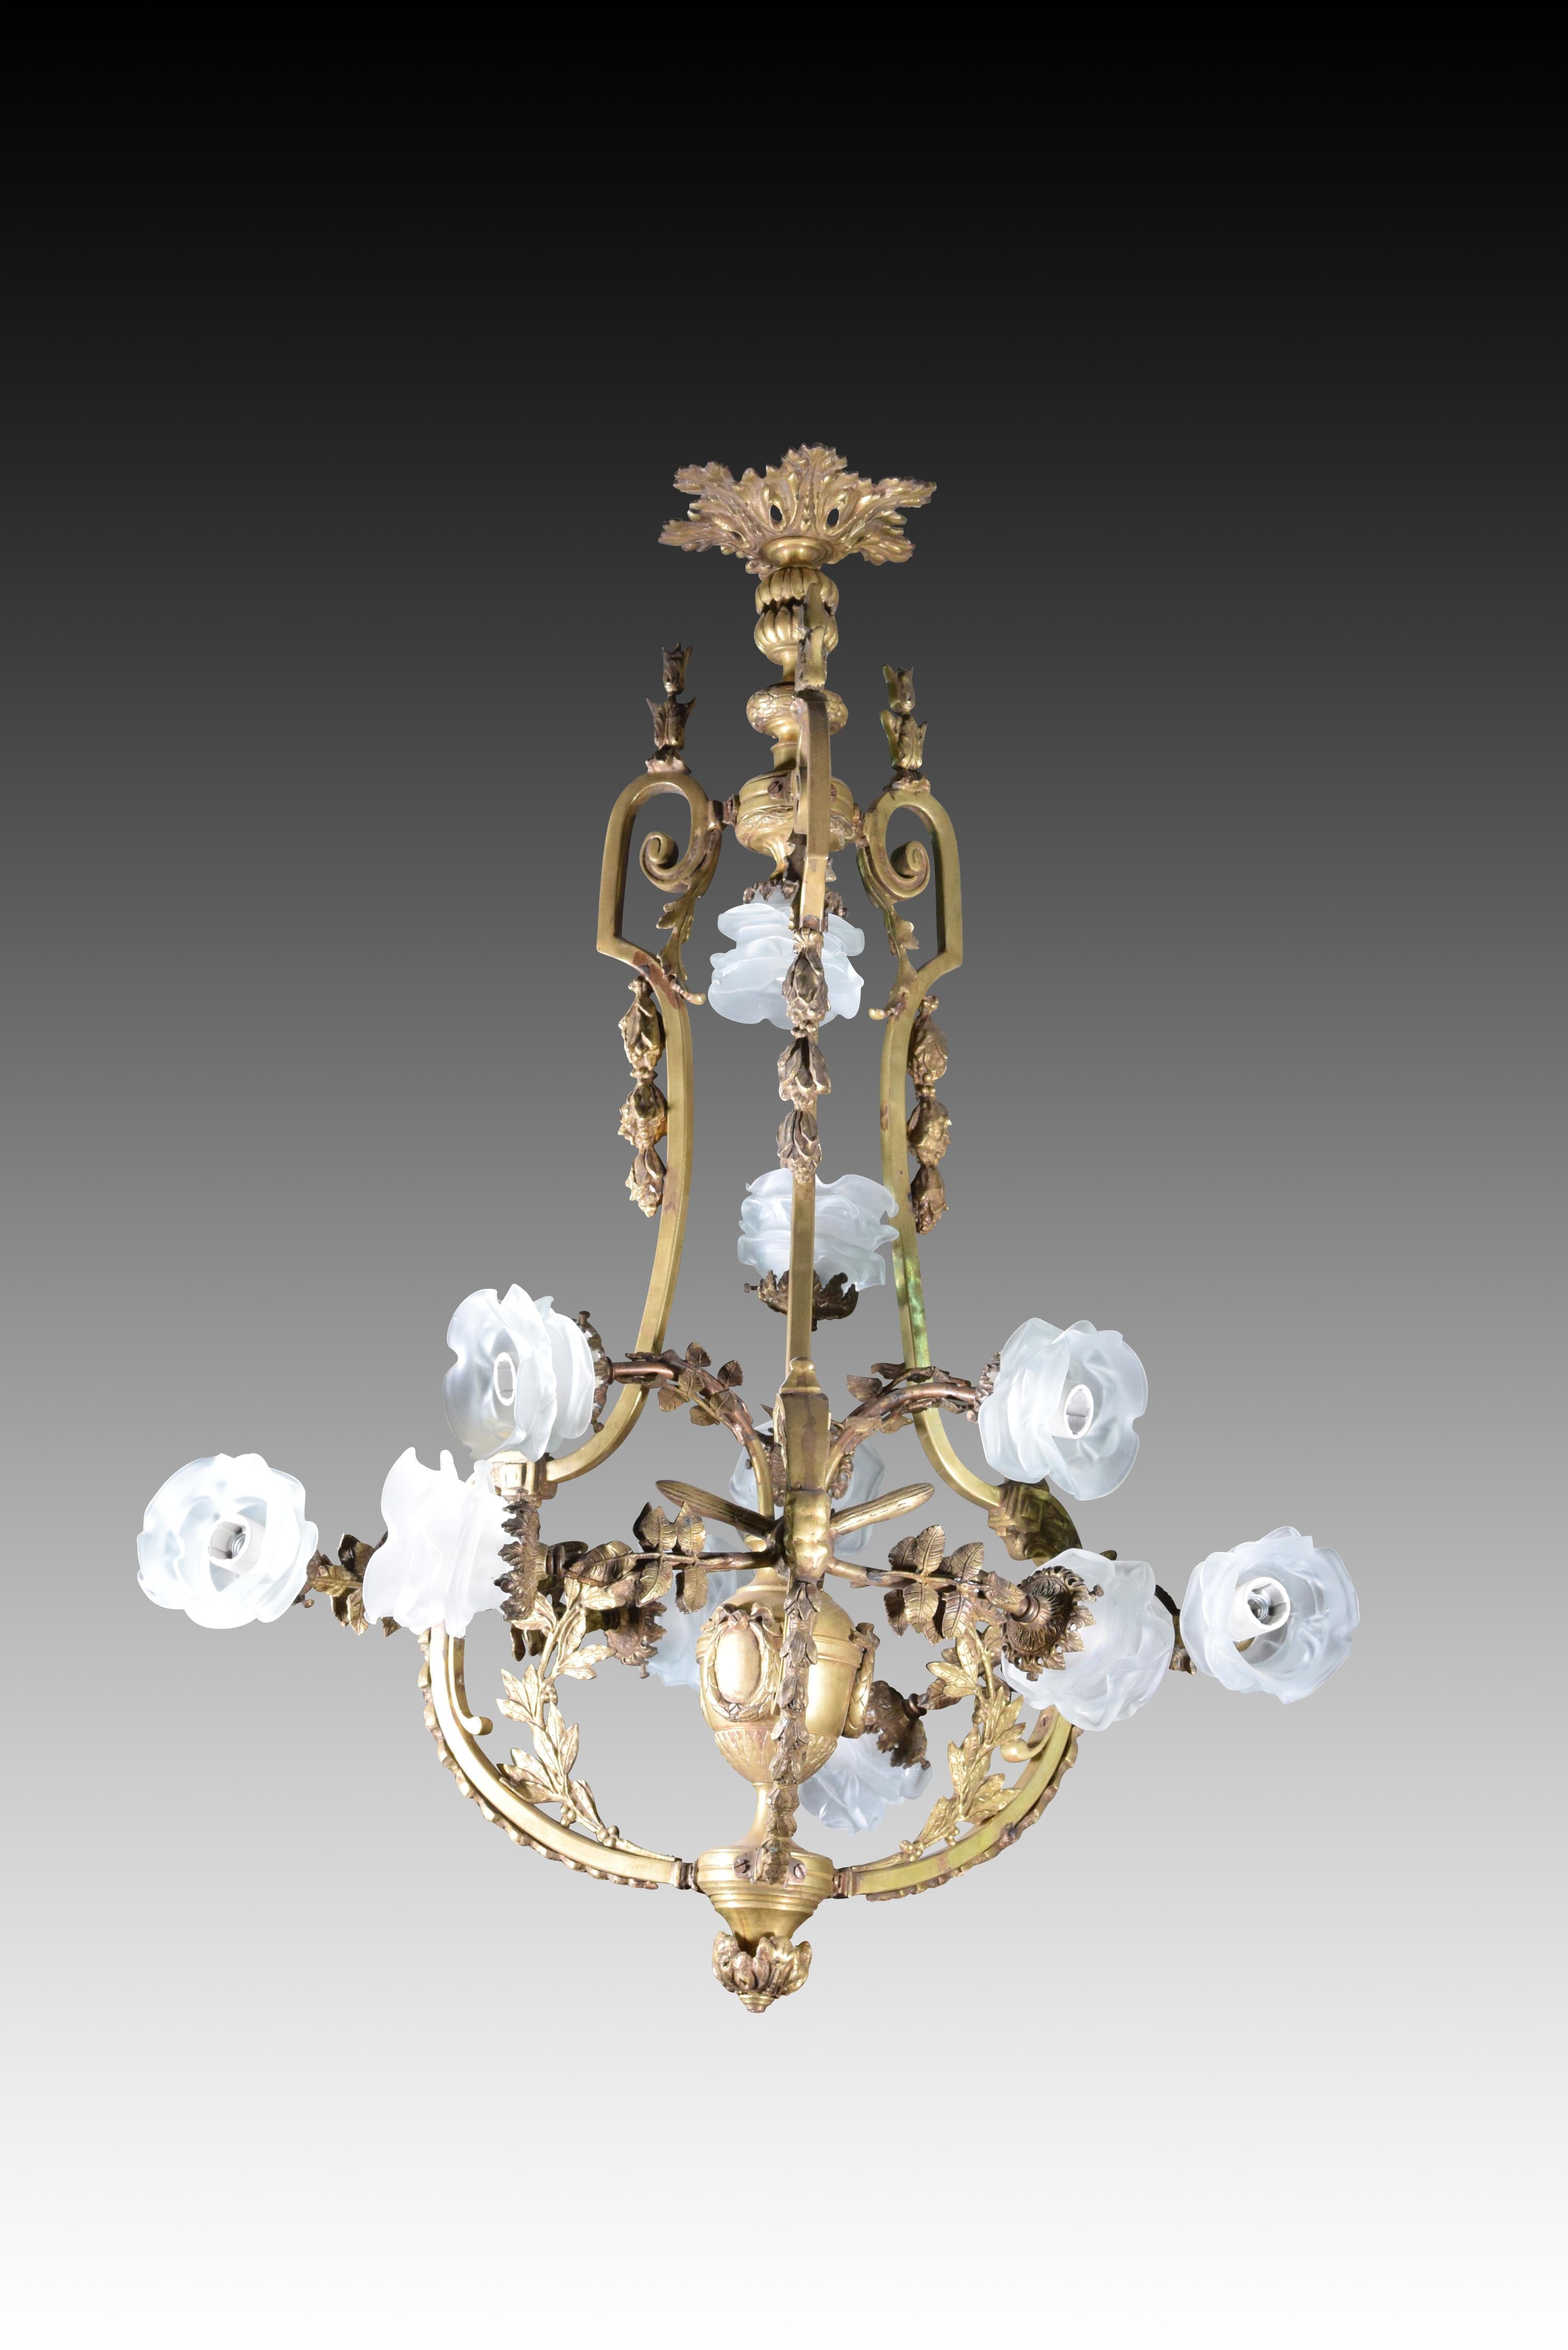 Eleven-light ceiling lamp. Bronze with aged finish.
 The central body of the lamp is formed by a vase with garlands resting on a round molding. From the upper part start a series of stems that end in the lights, whose curved stem has been made from